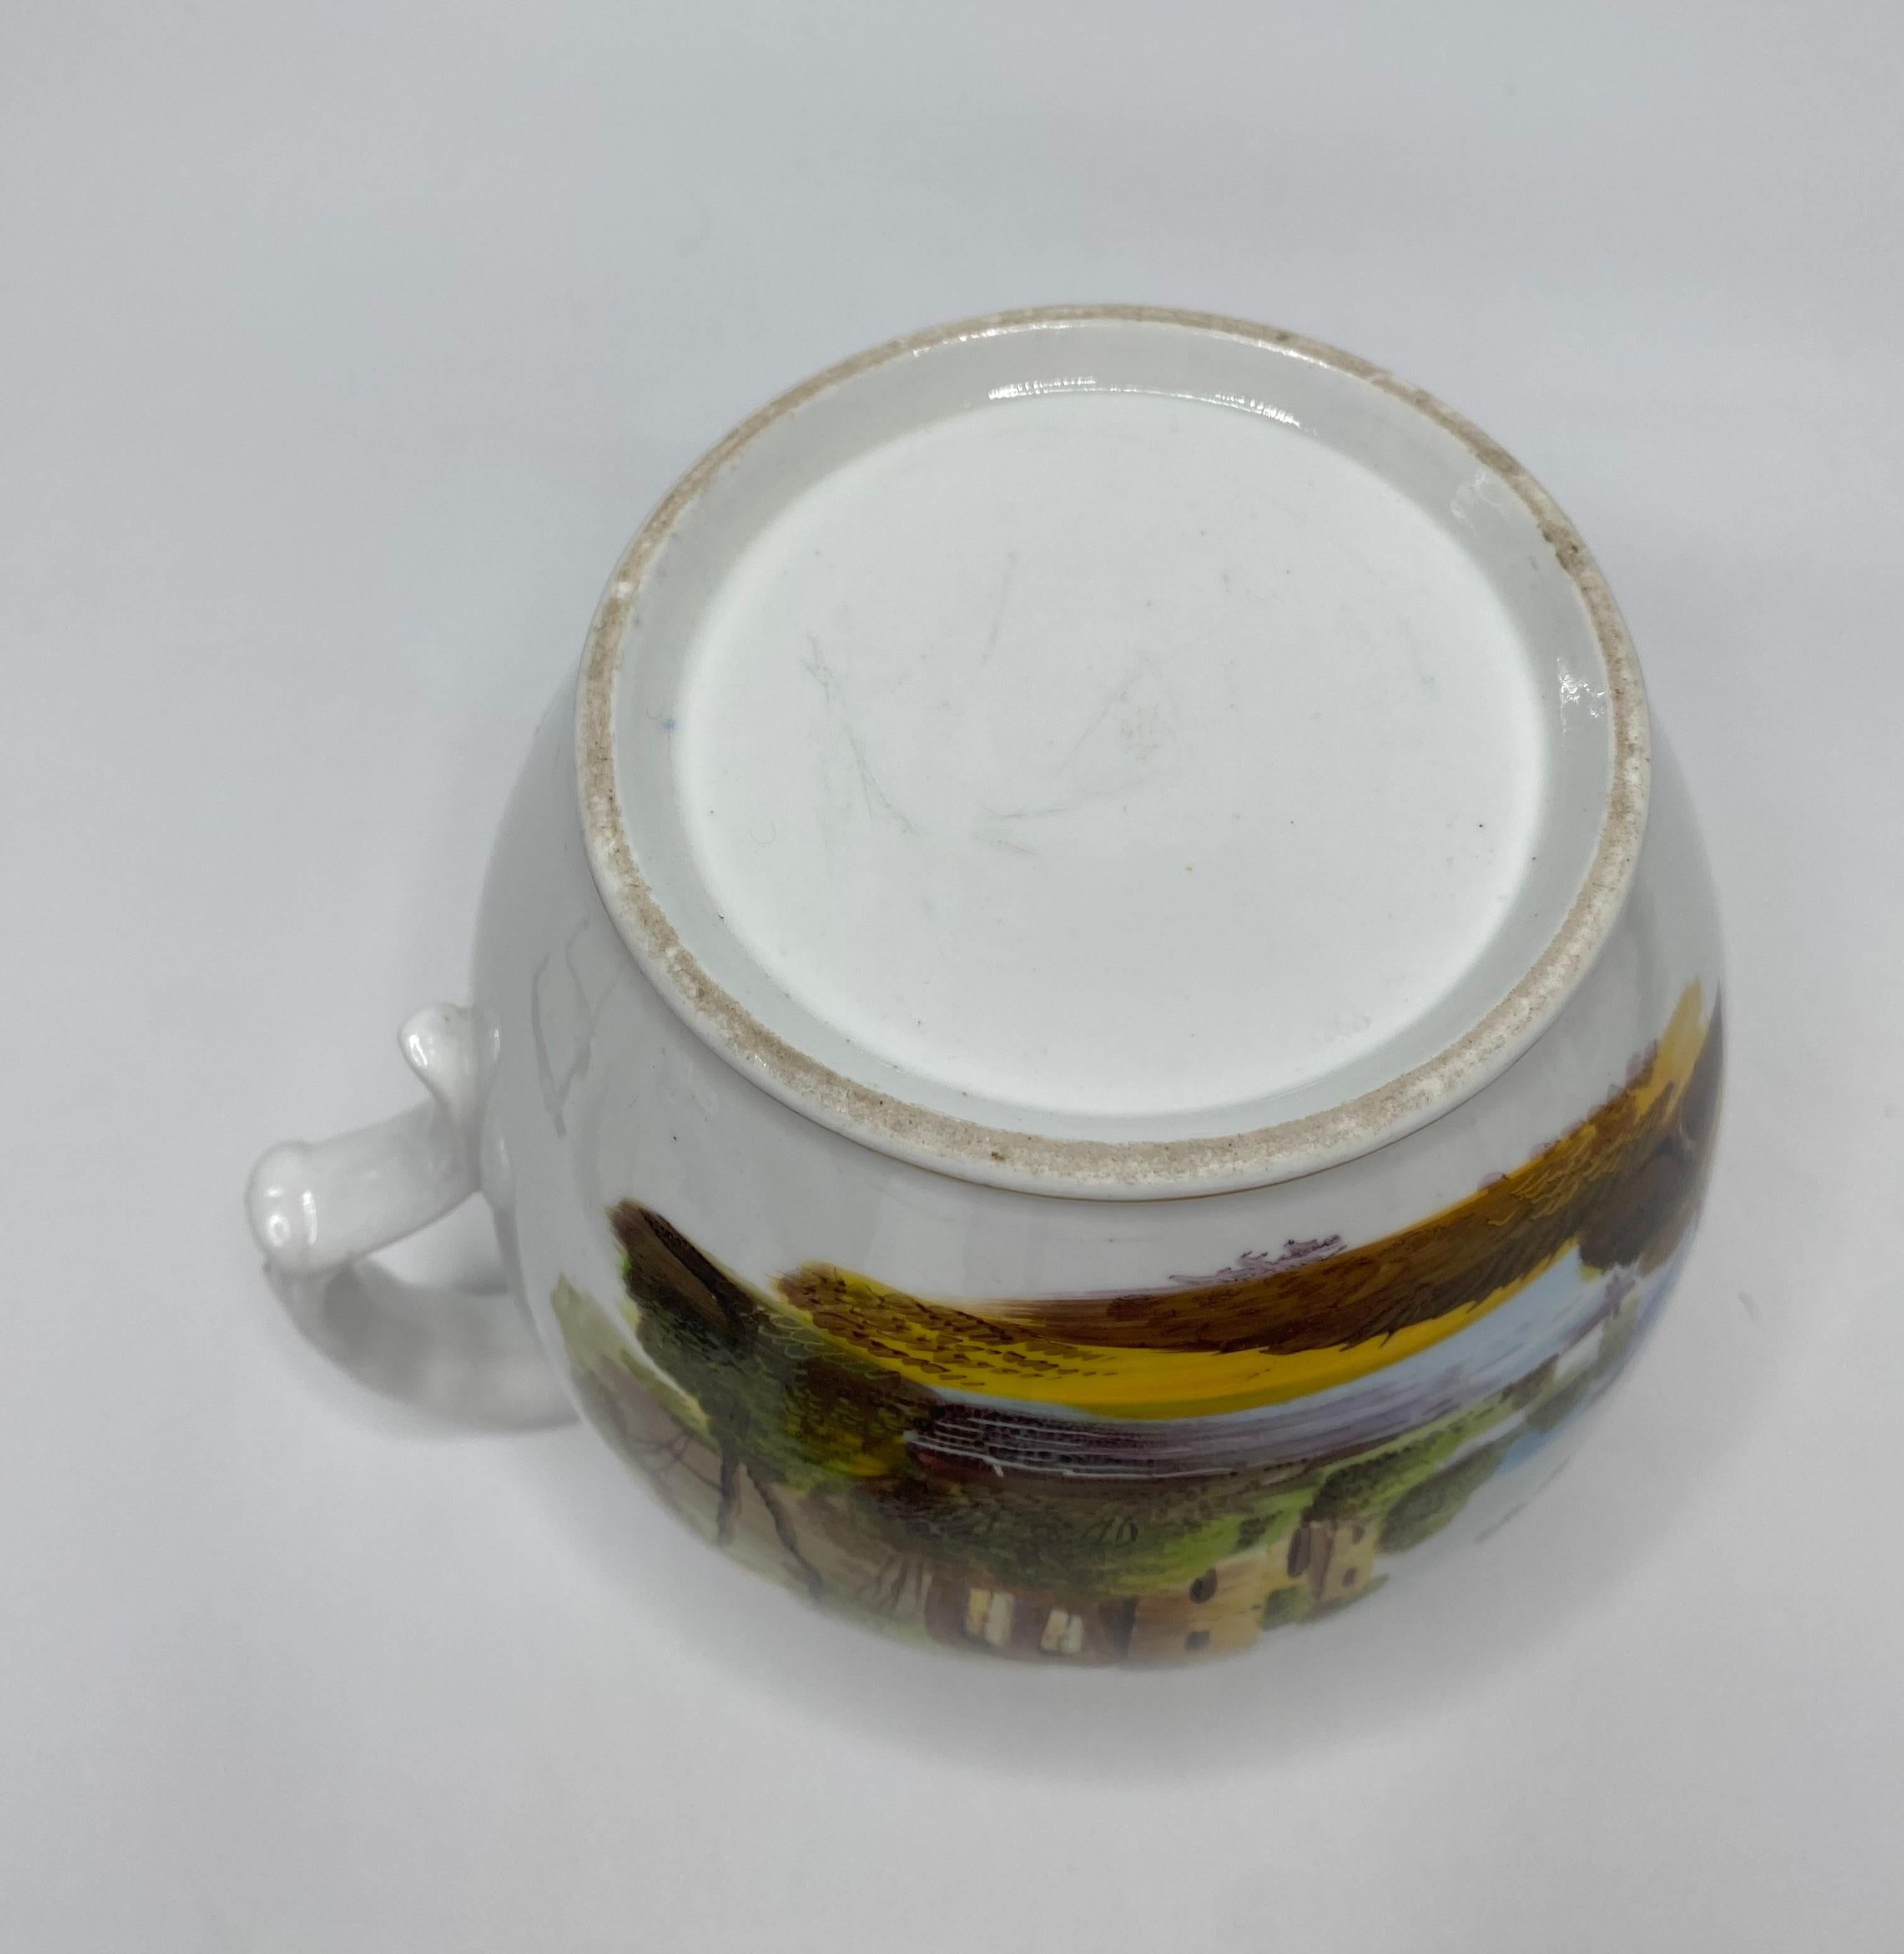 New Hall bone china water jug, ‘JH’, c. 1815. In Excellent Condition For Sale In Gargrave, North Yorkshire